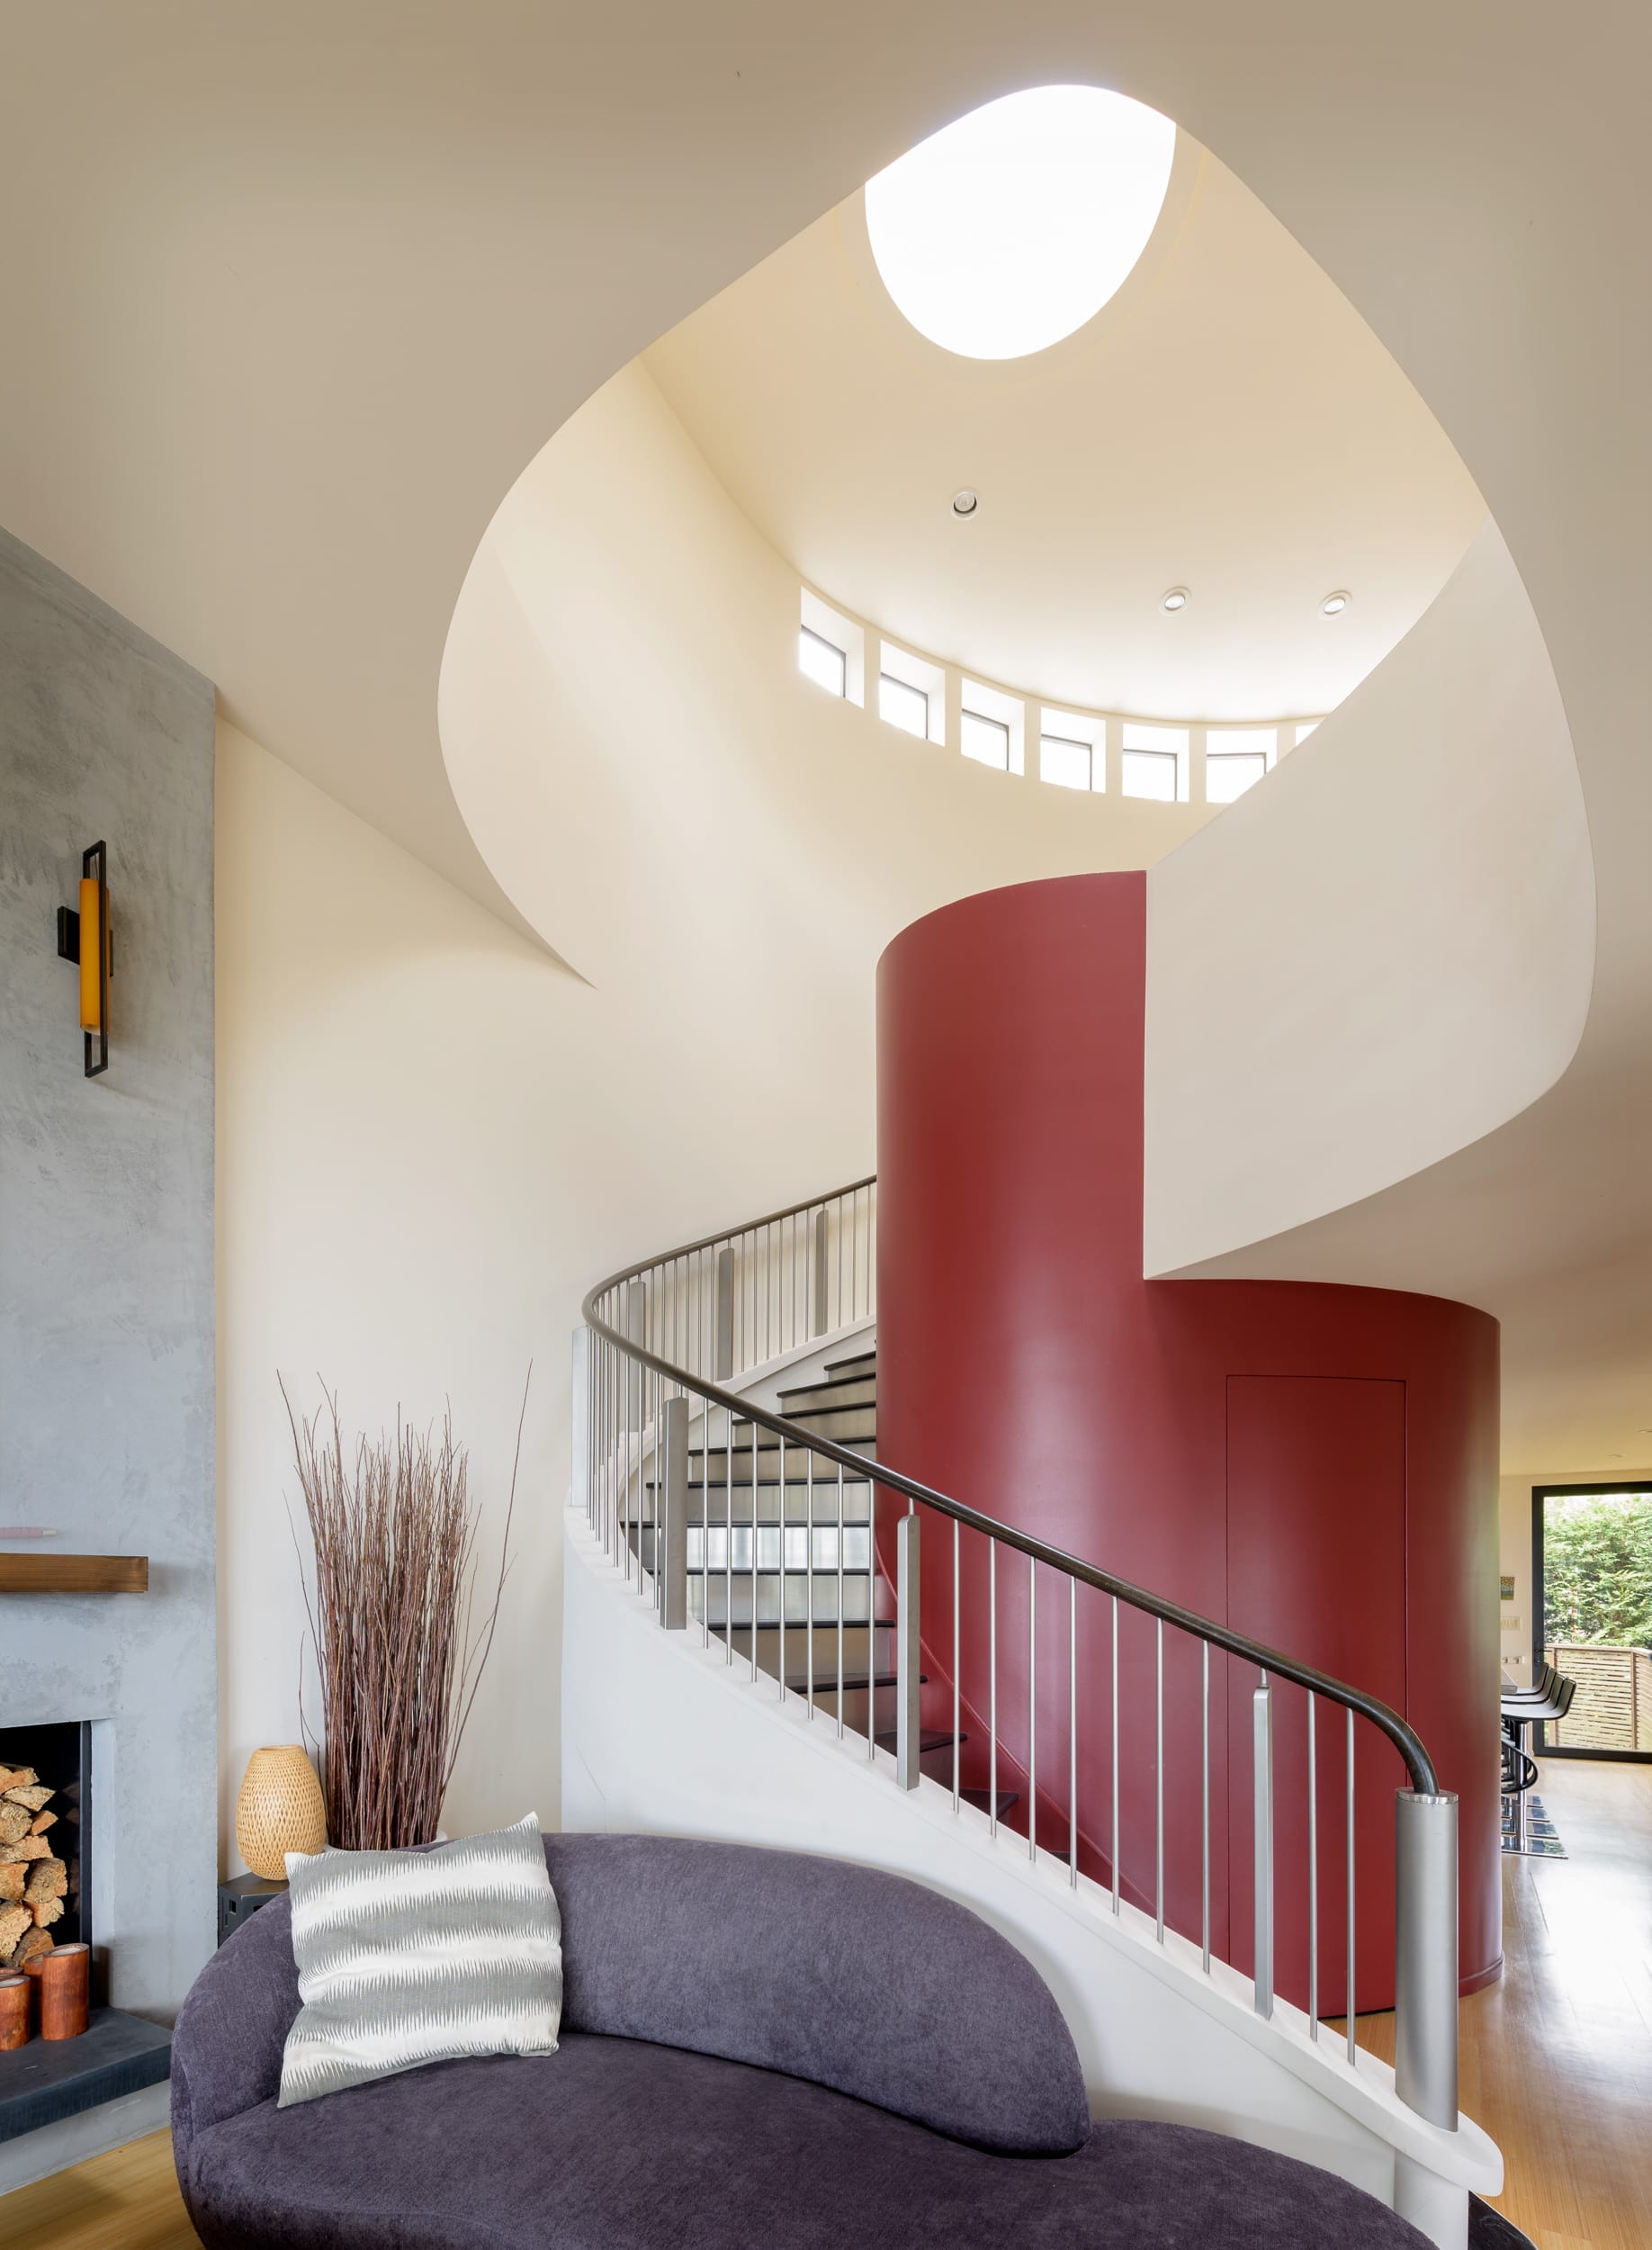 A spiral staircase in a living room.